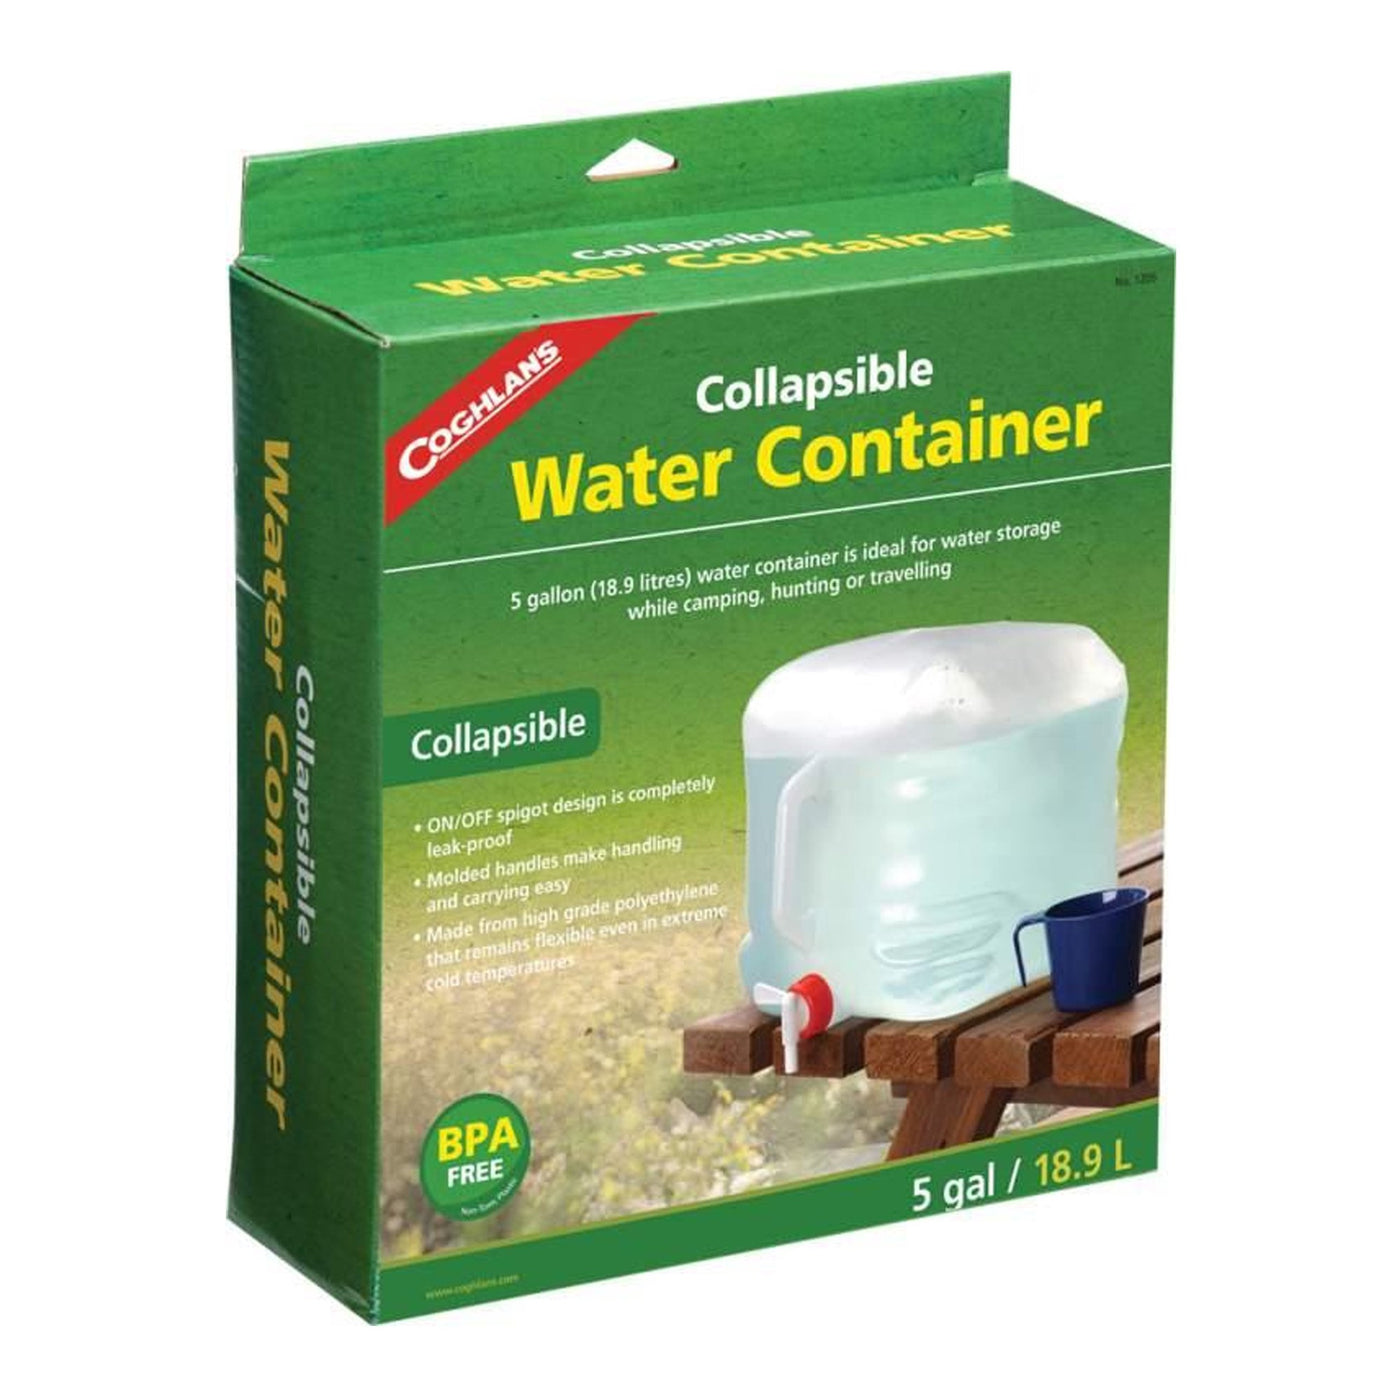 Collapsible Water Container